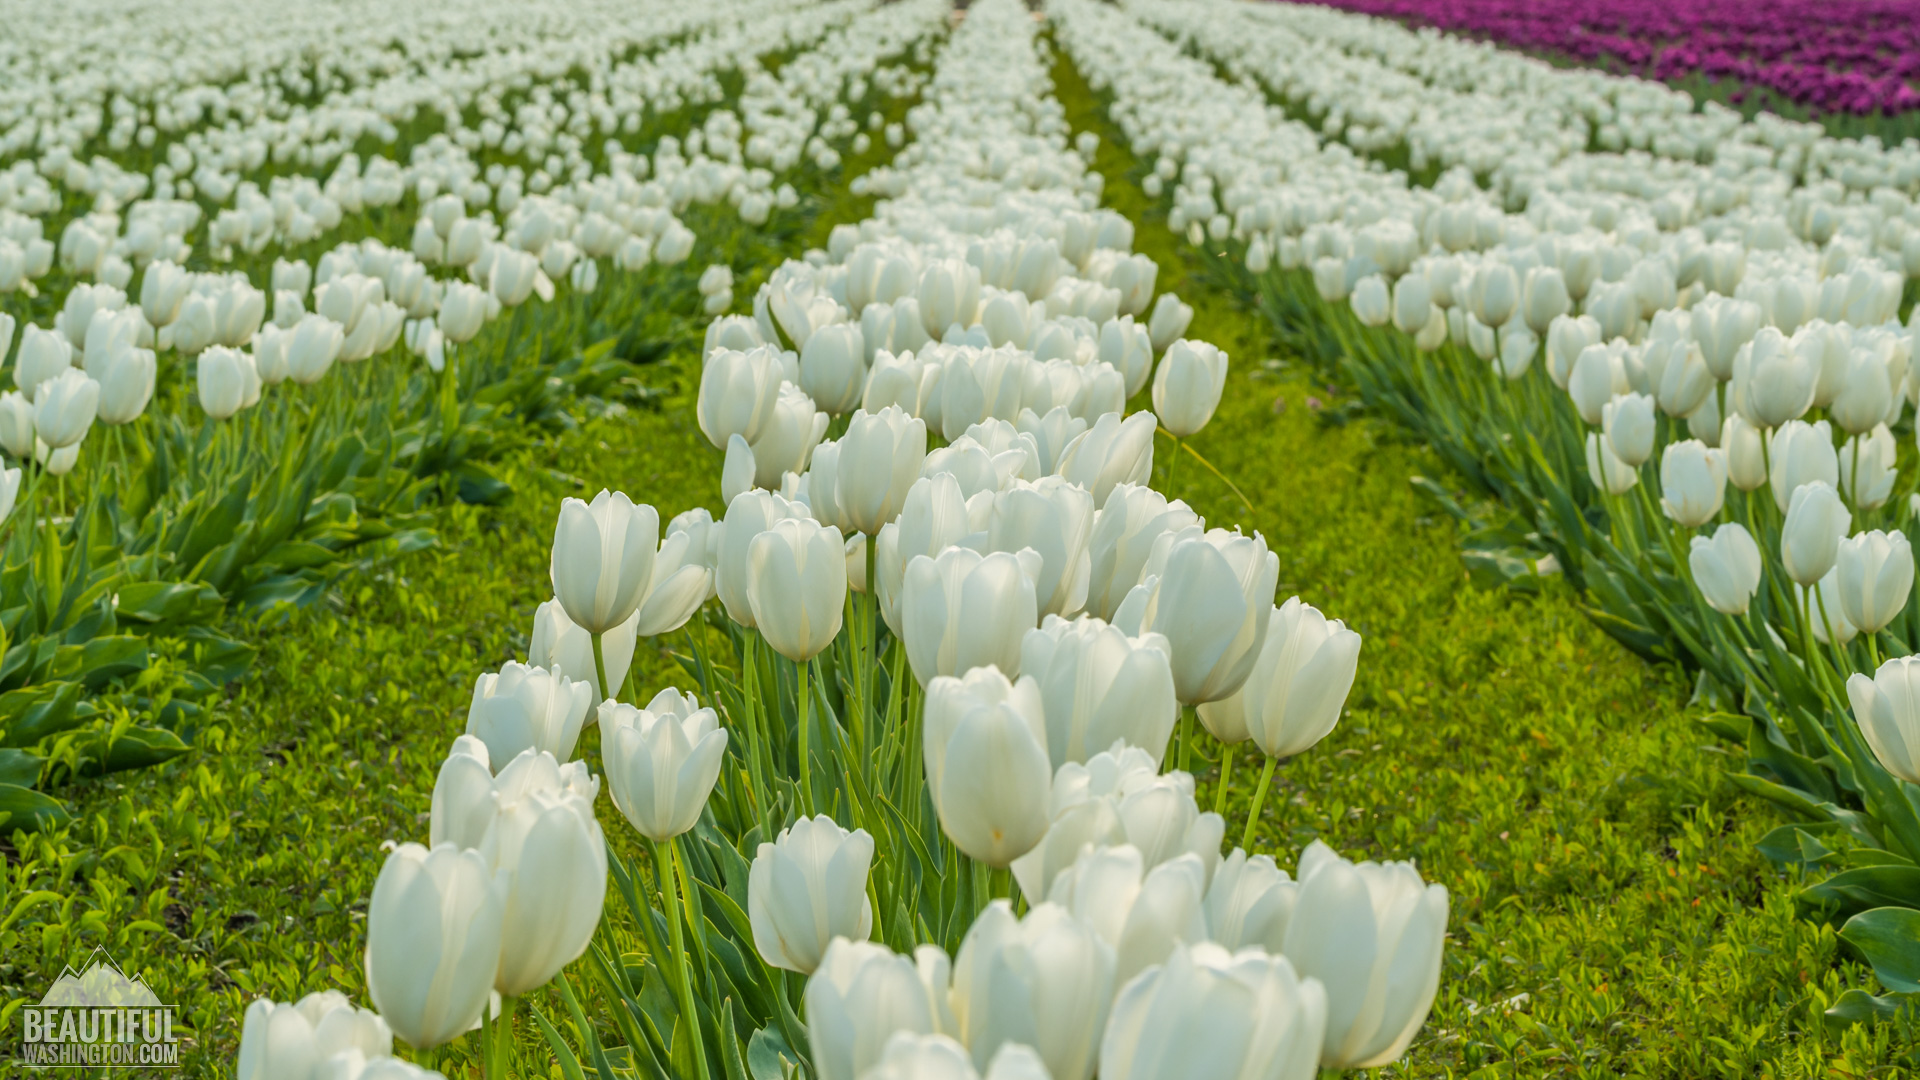 Tulip Fields at Skagit Valley - largest floral festival in WA